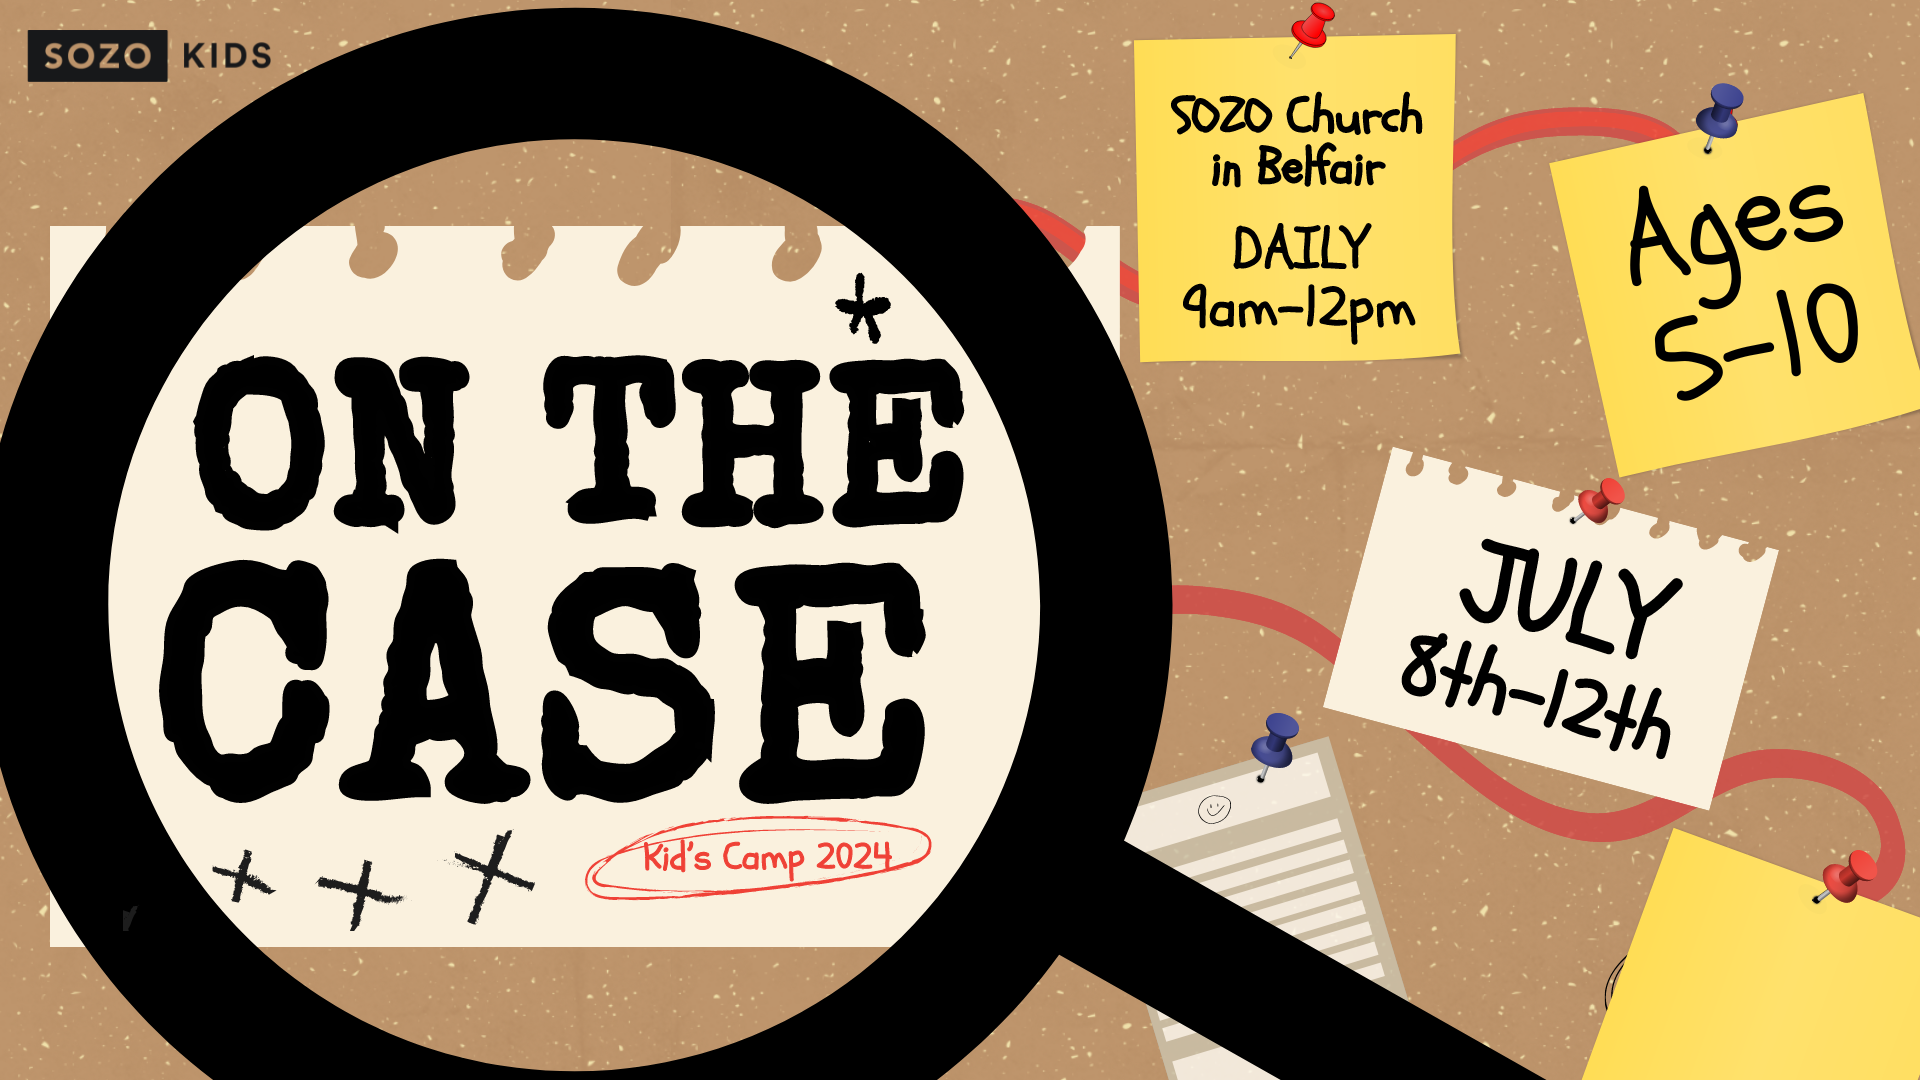 SOZO KIDS CAMP 2024 – ON THE CASE Image